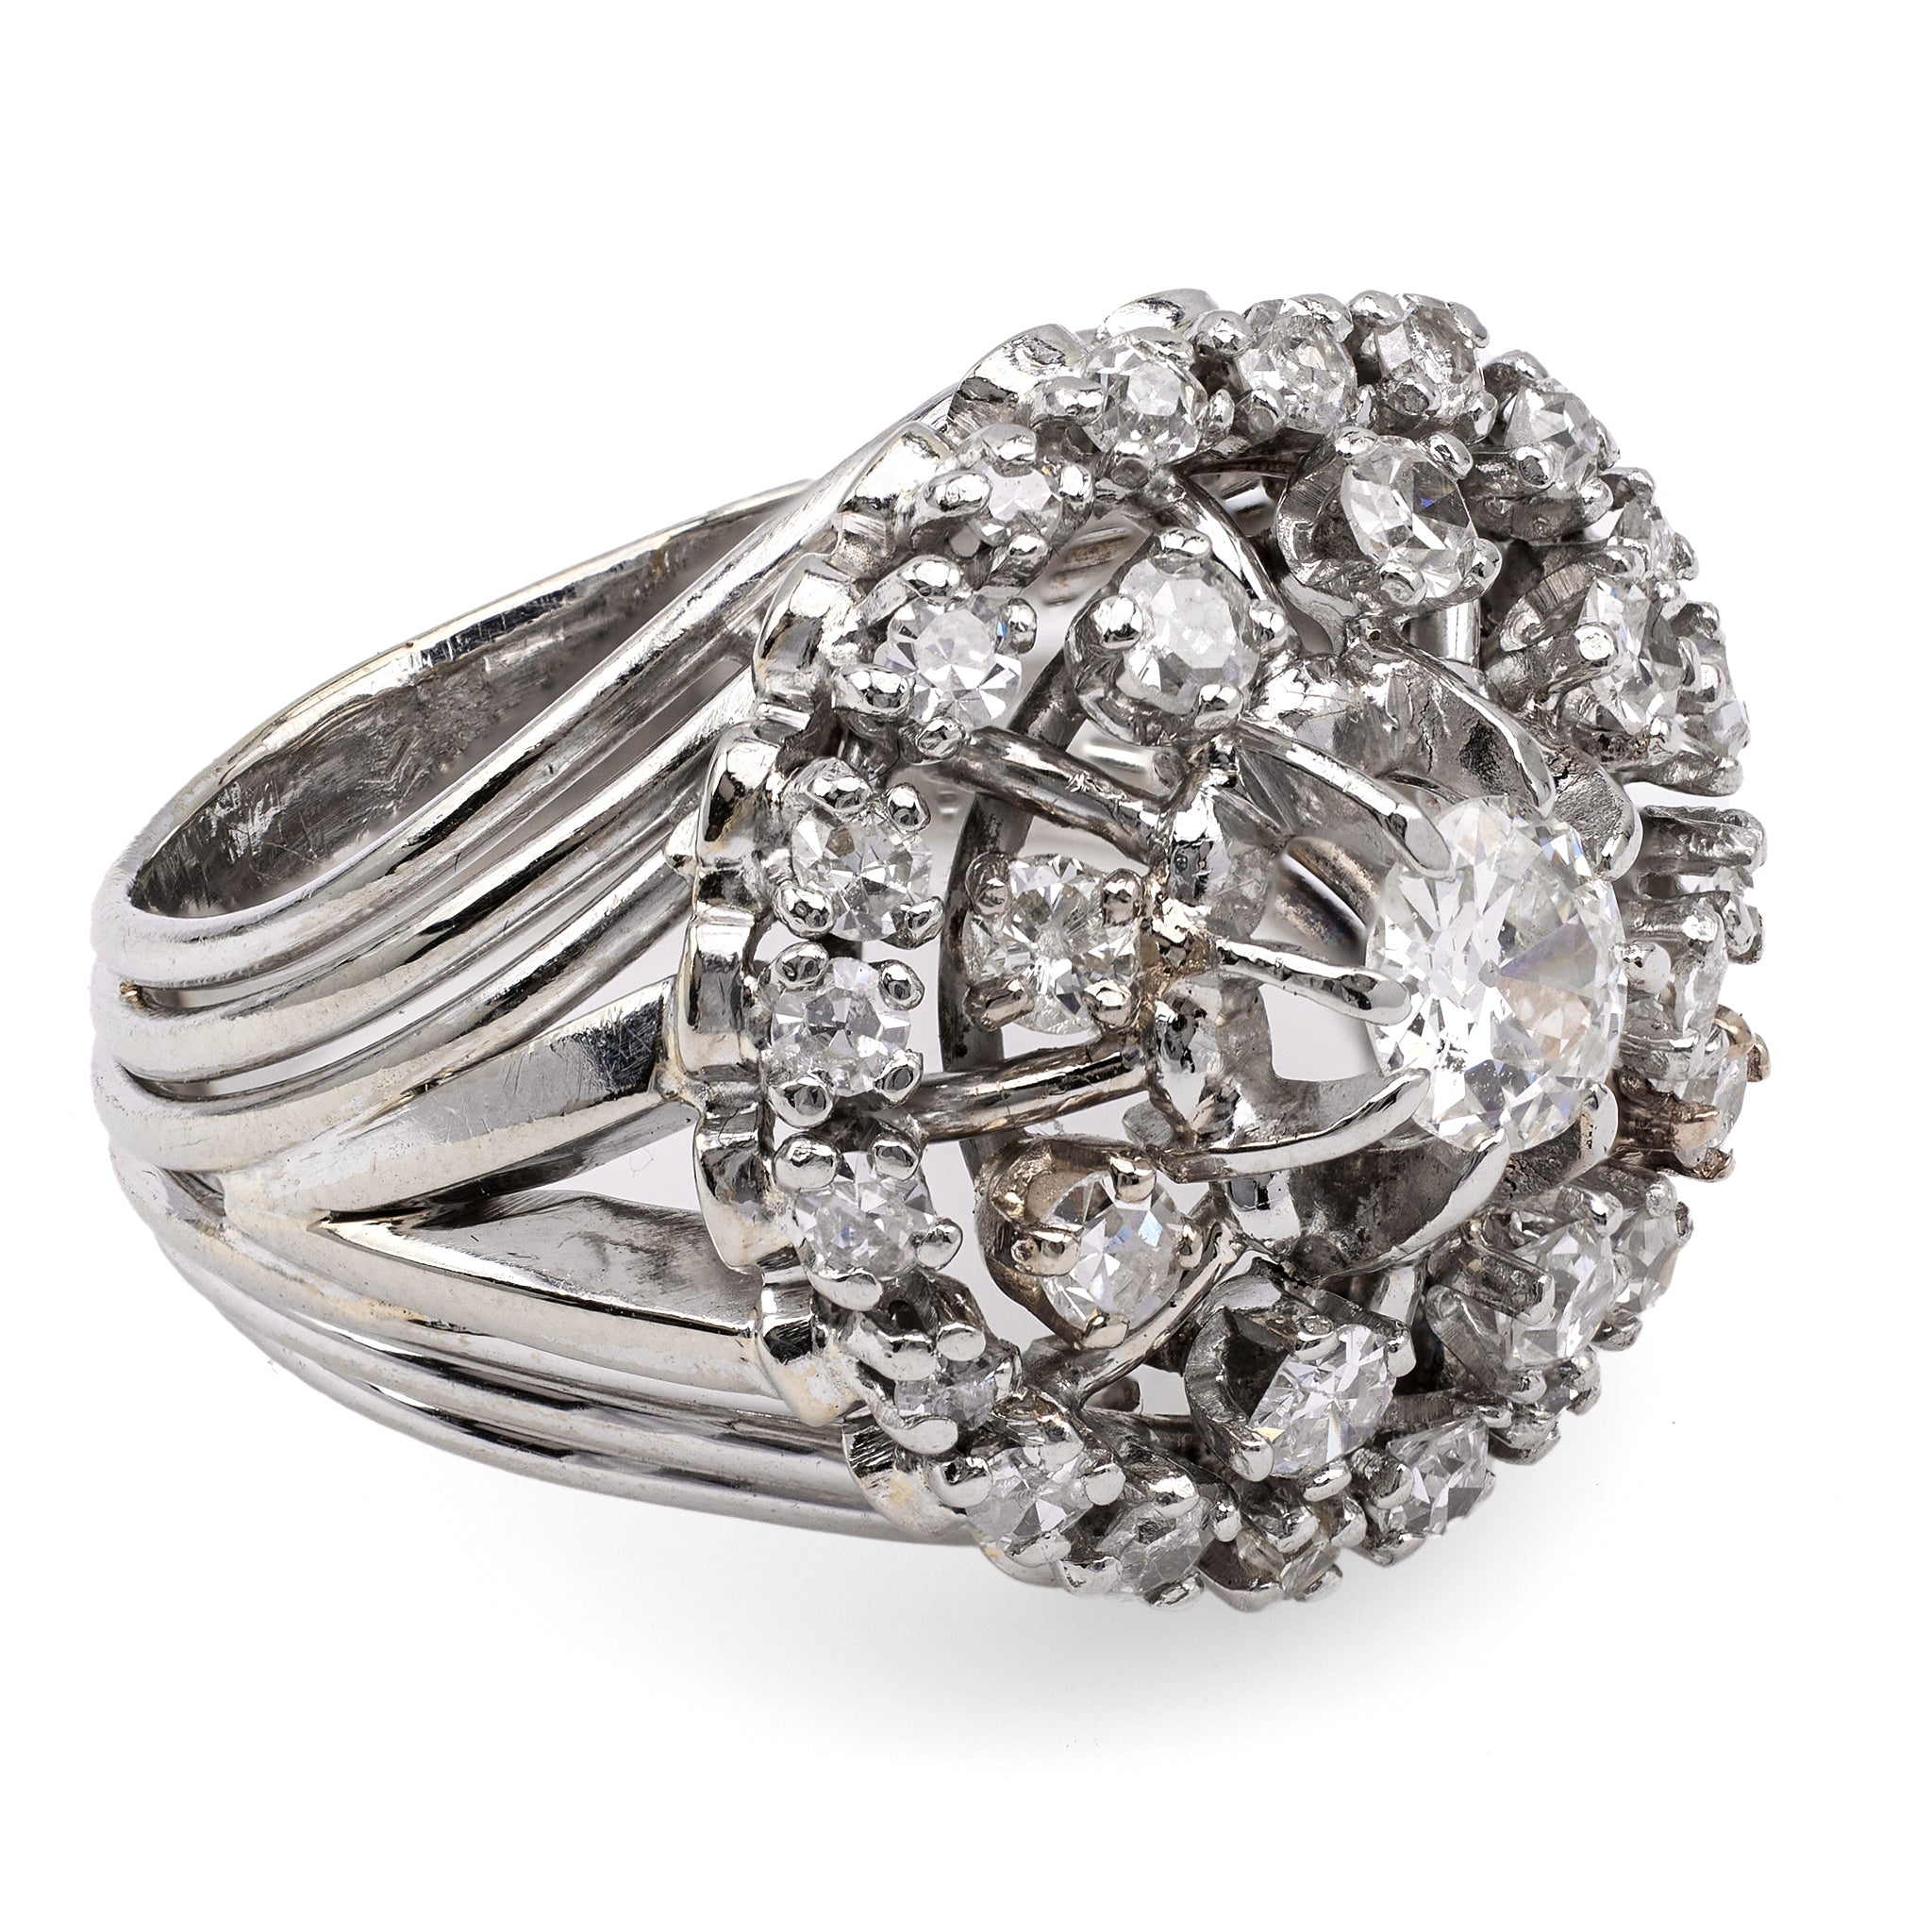 Retro French Diamond Platinum 18k White Gold Cluster Cocktail Ring Rings Jack Weir & Sons   